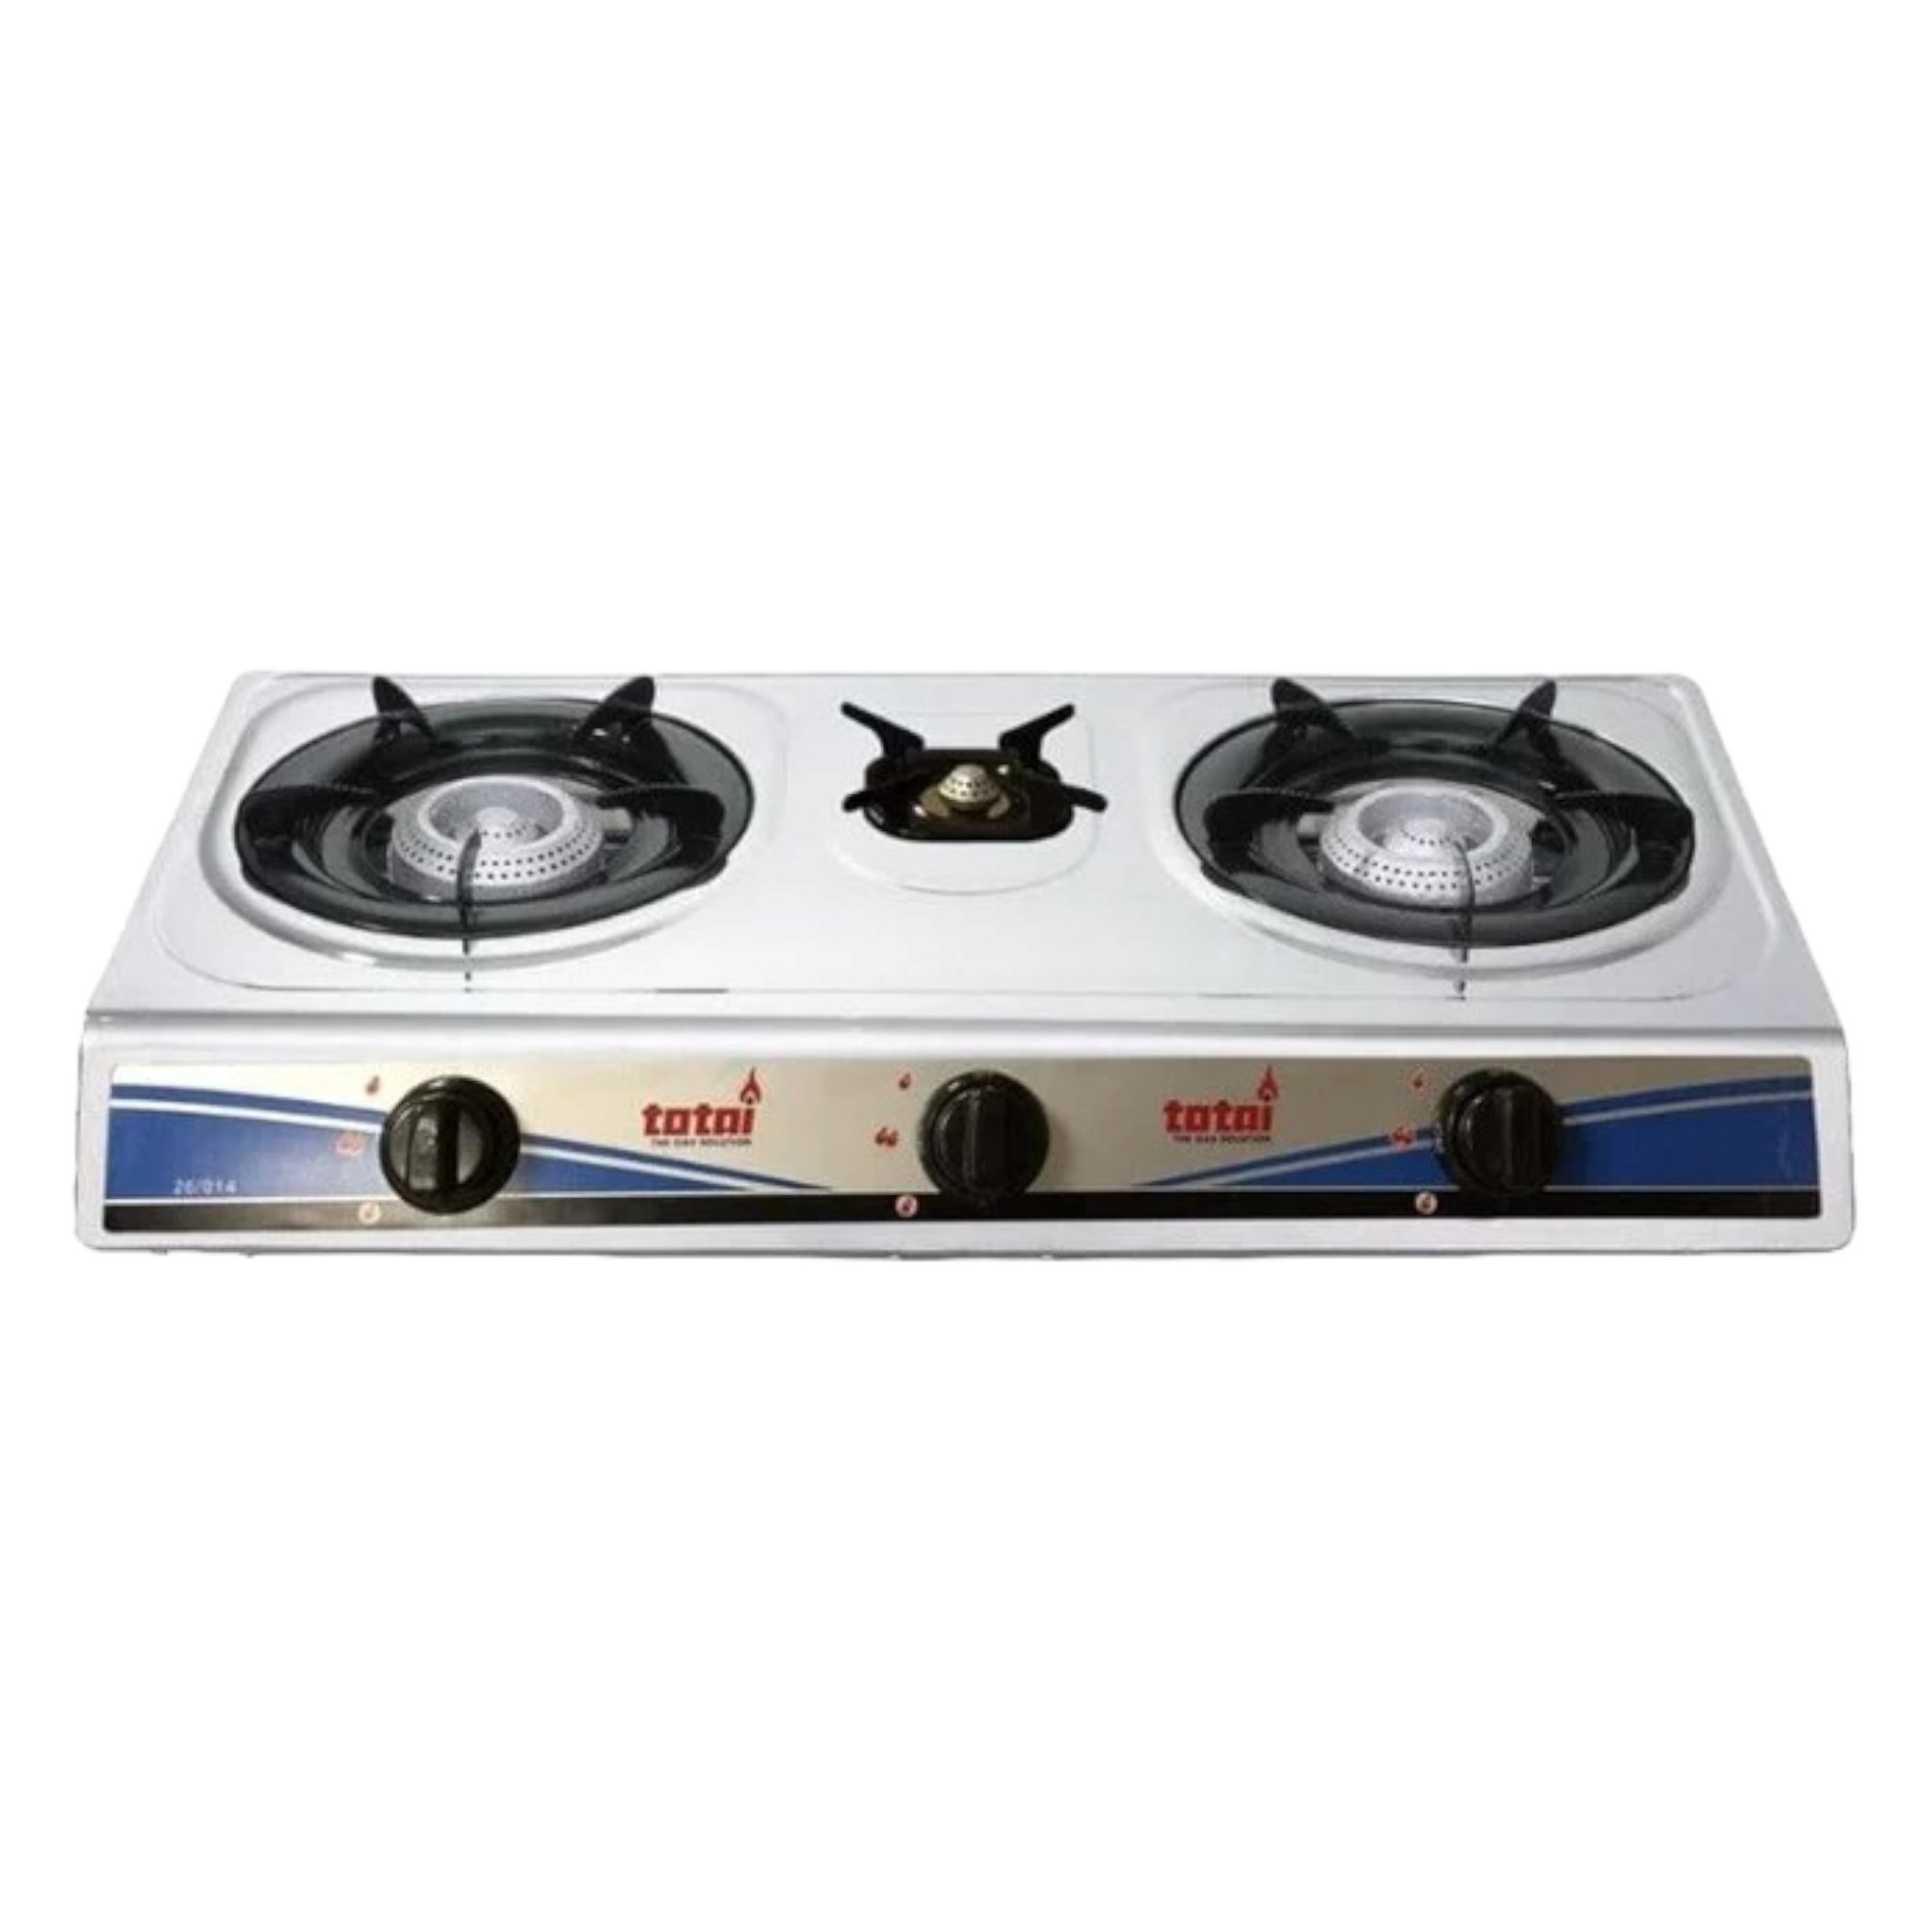 Totai Gas Stove 3 Burner Stainless Steel Table Top